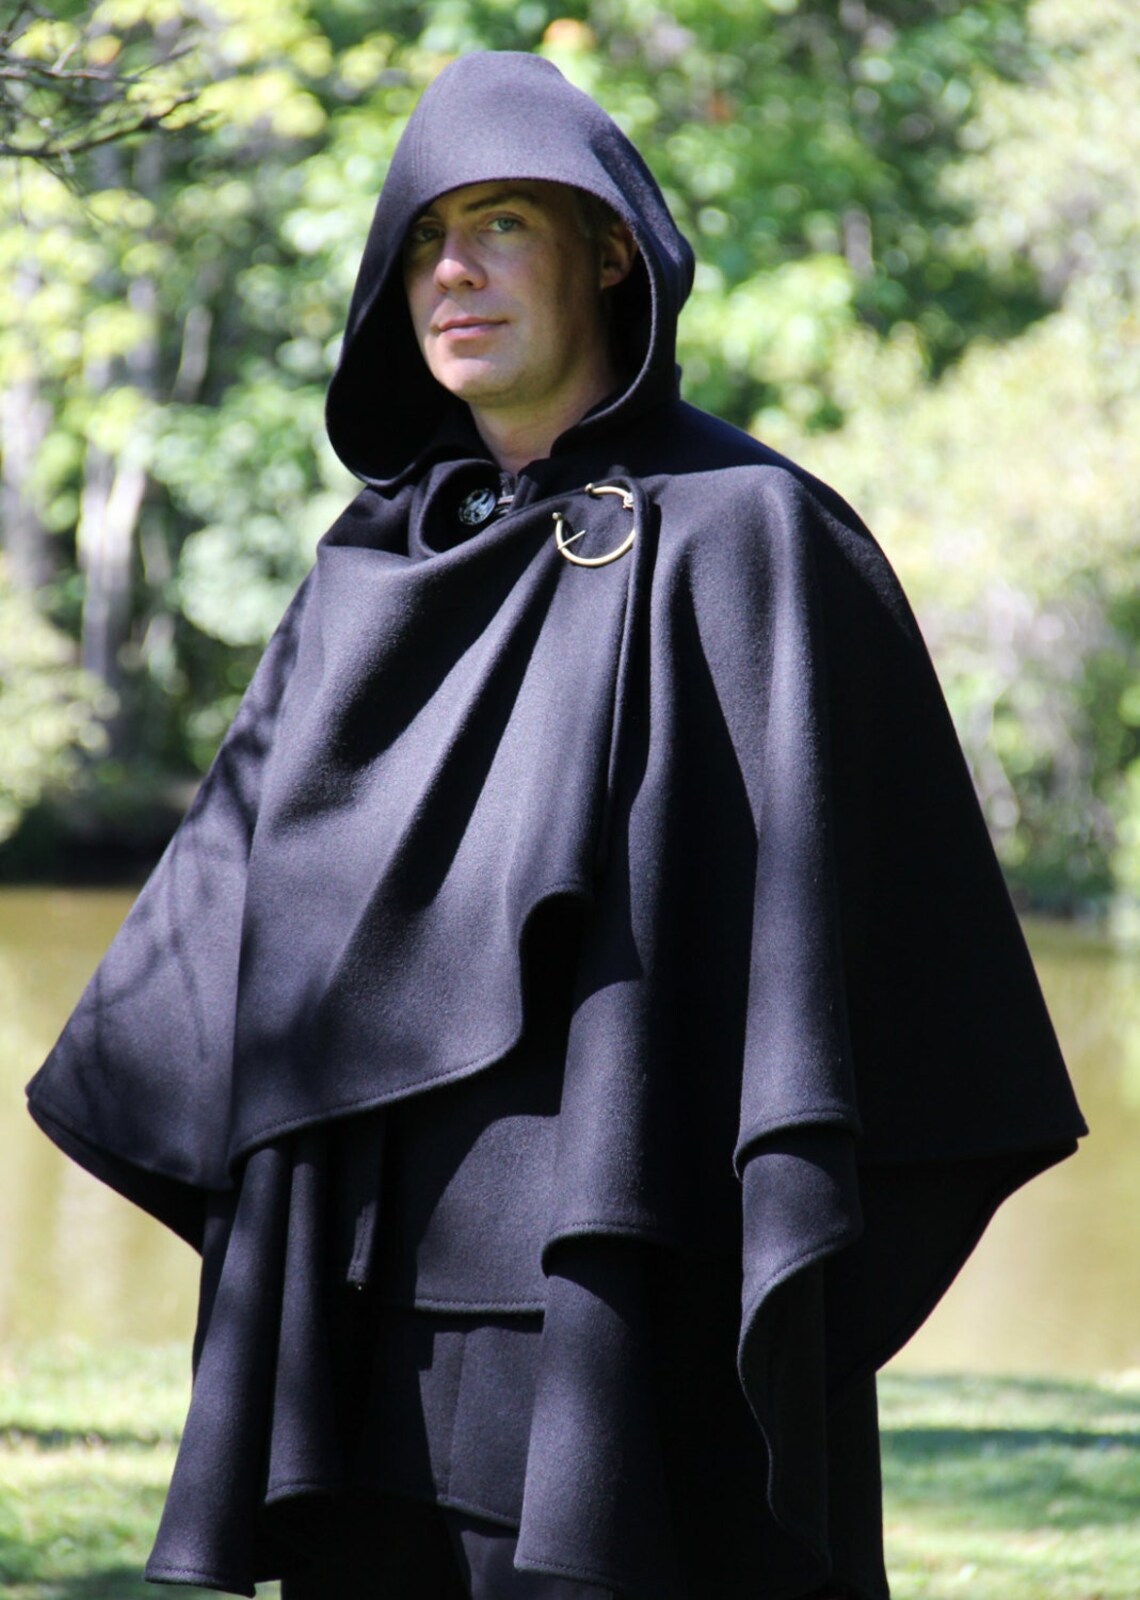 Double Cape Wool Cape Black Cape Cape With Hood Hooded - Etsy